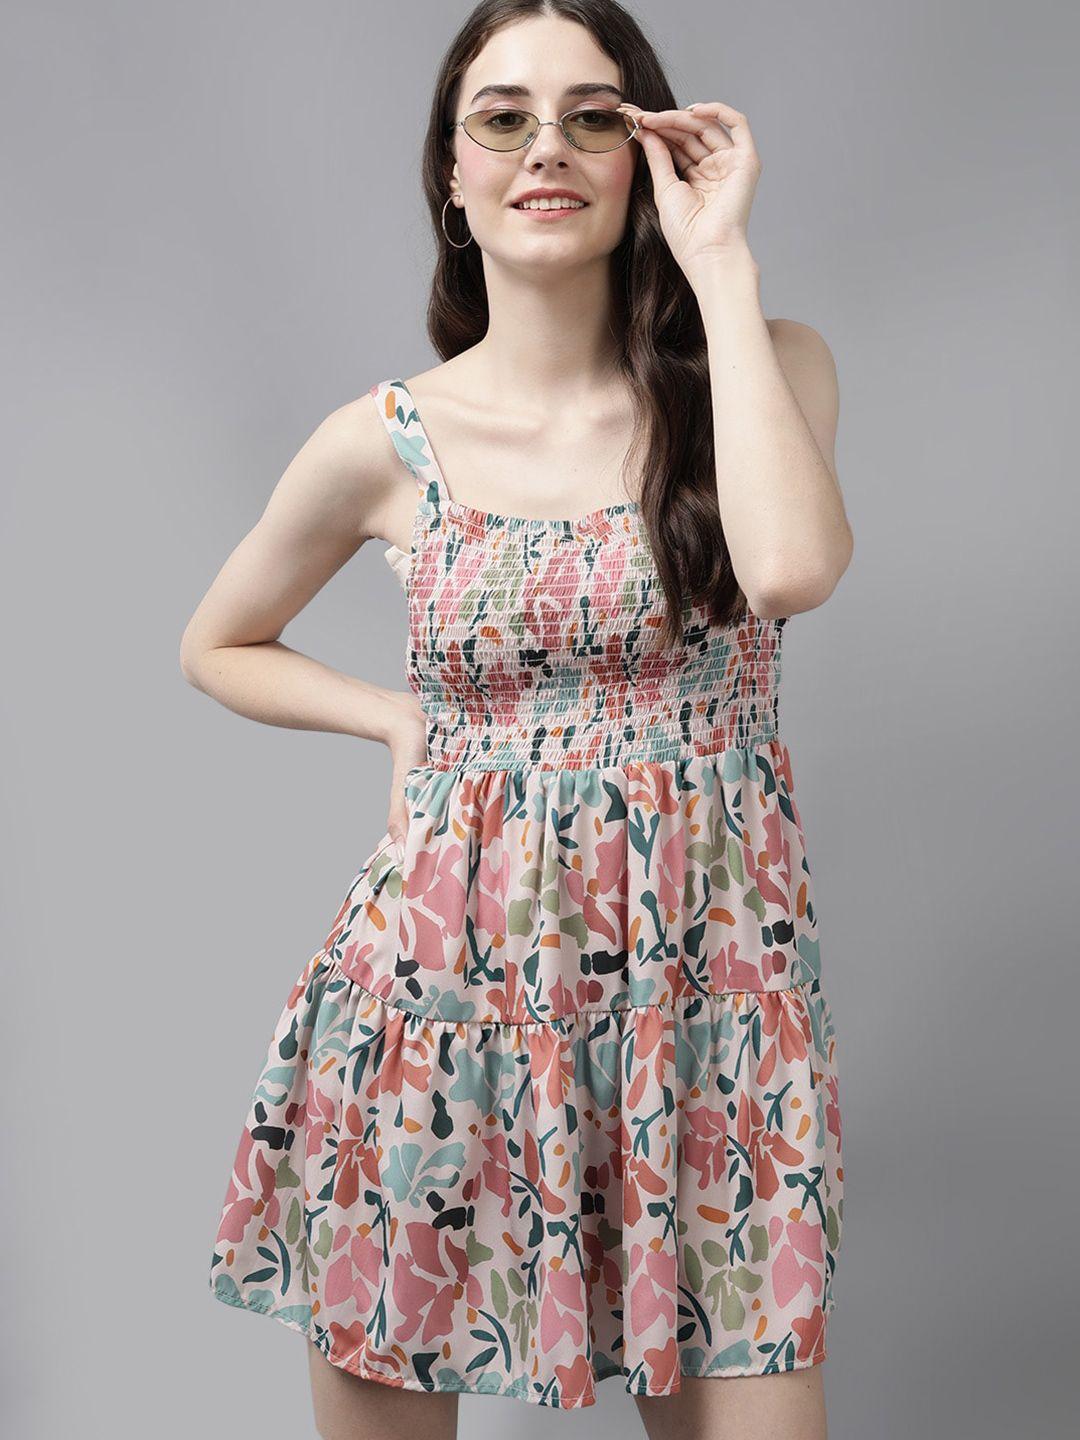 mast & harbour cream-coloured floral printed crepe fit & flare dress